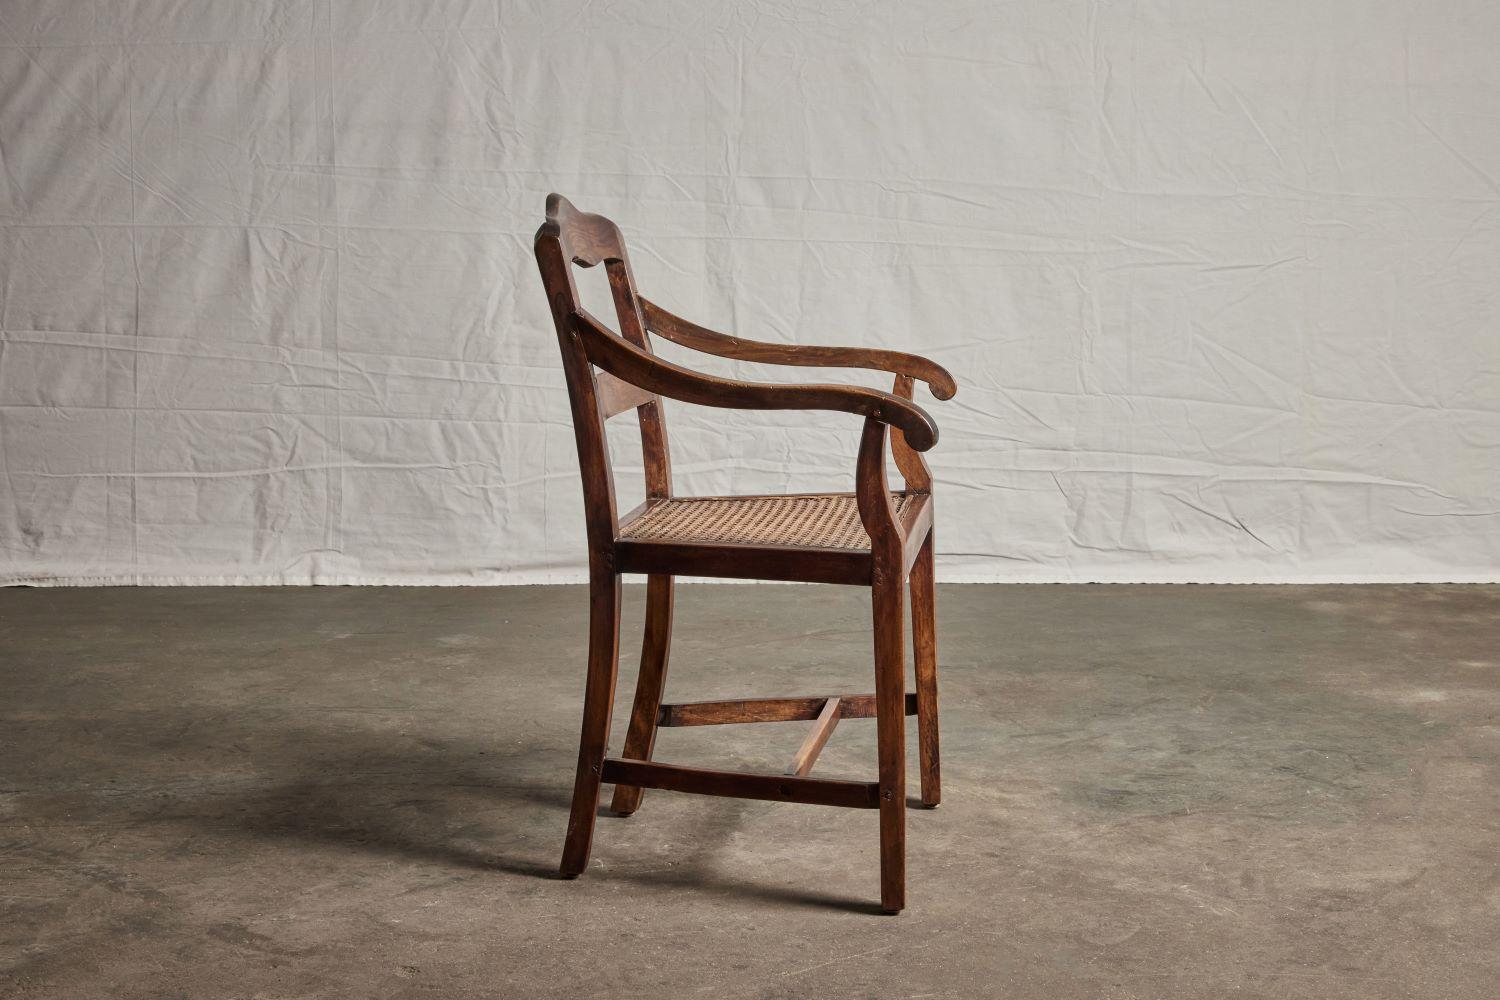 Philippine Nara Wood Arm Chair with Cane Seat 3